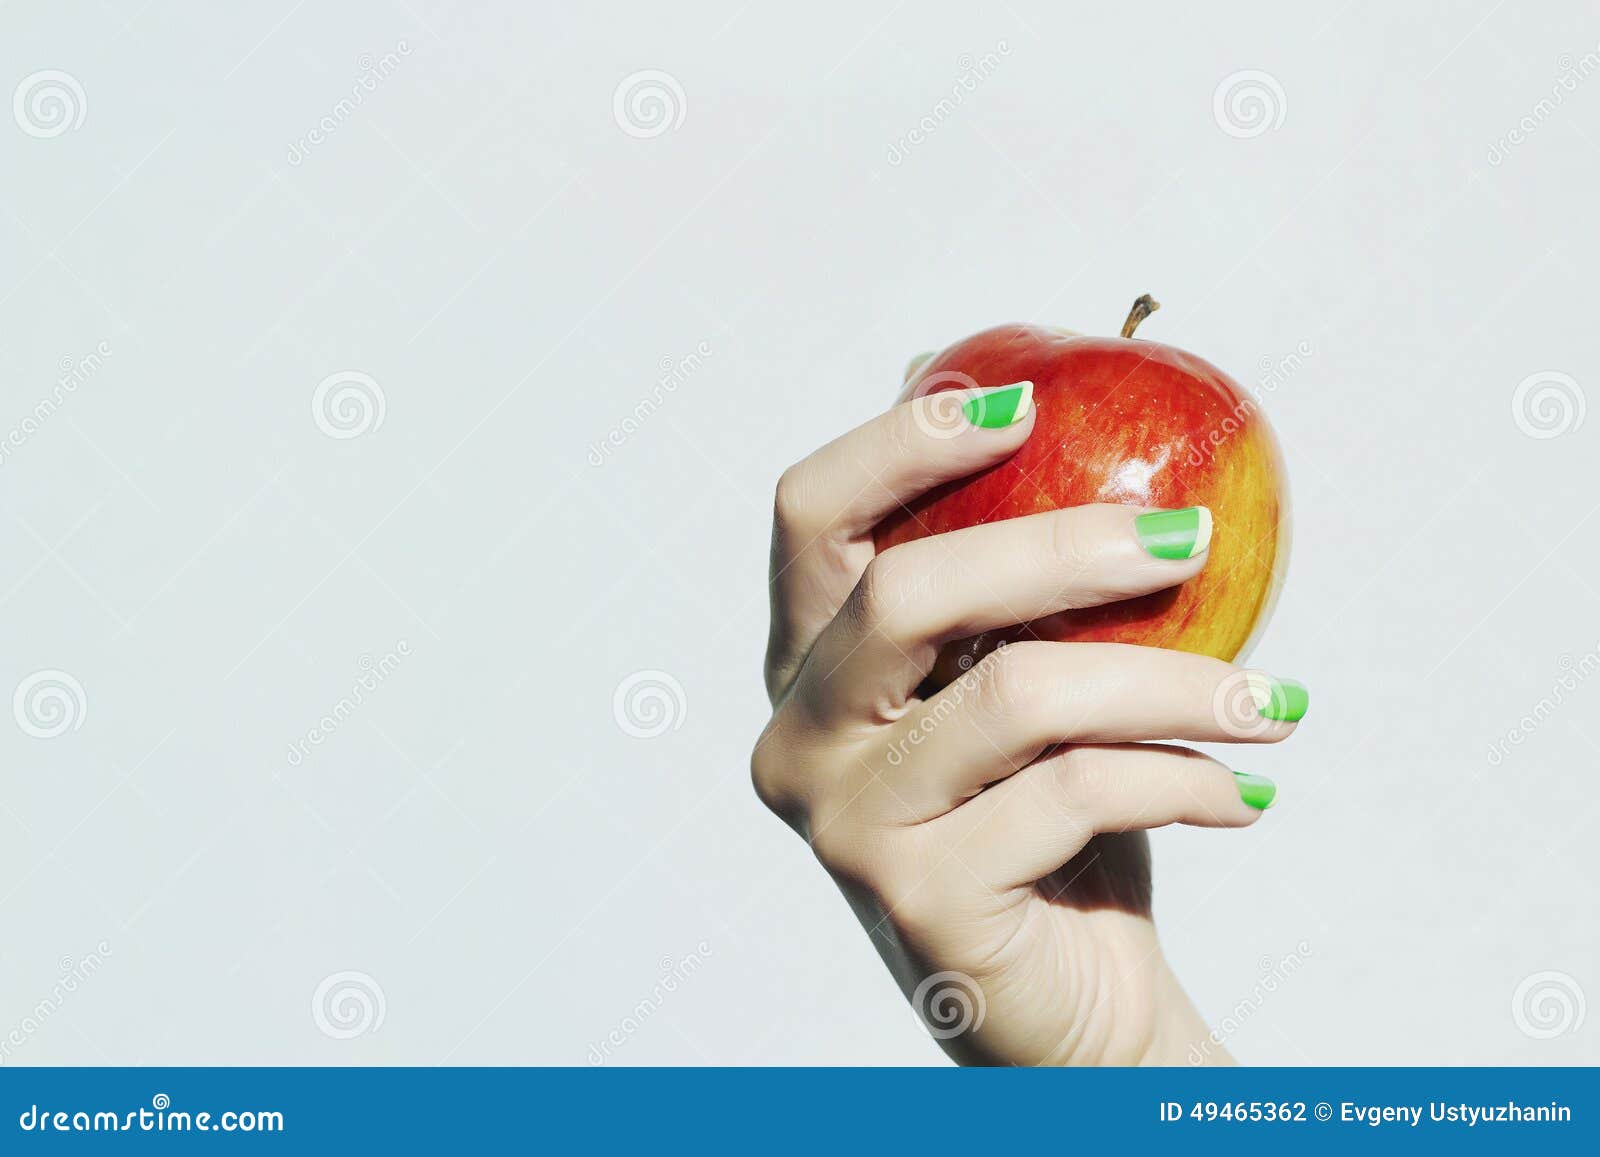 apple in hand with manicure.beauty salon woman shellac polish nail